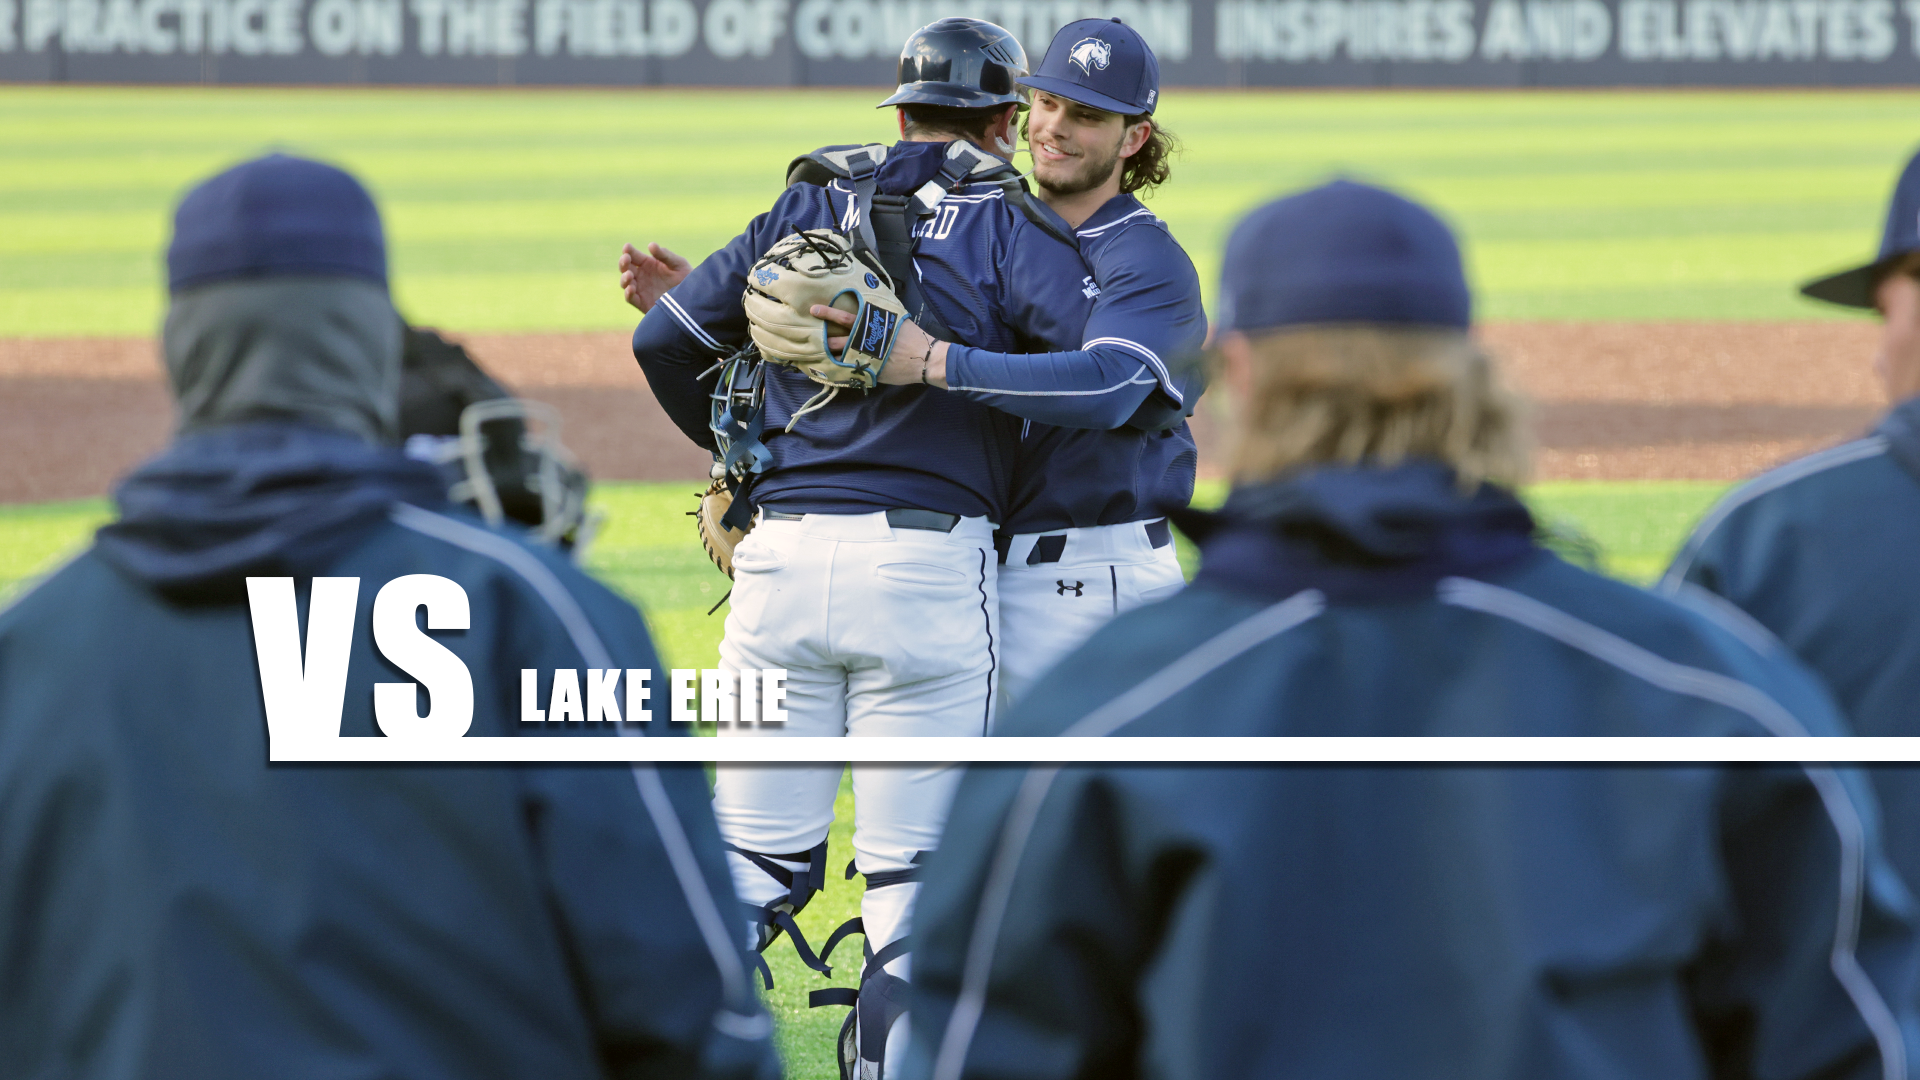 Preview: Chargers travel to Northeast Ohio for critical series against Lake Erie